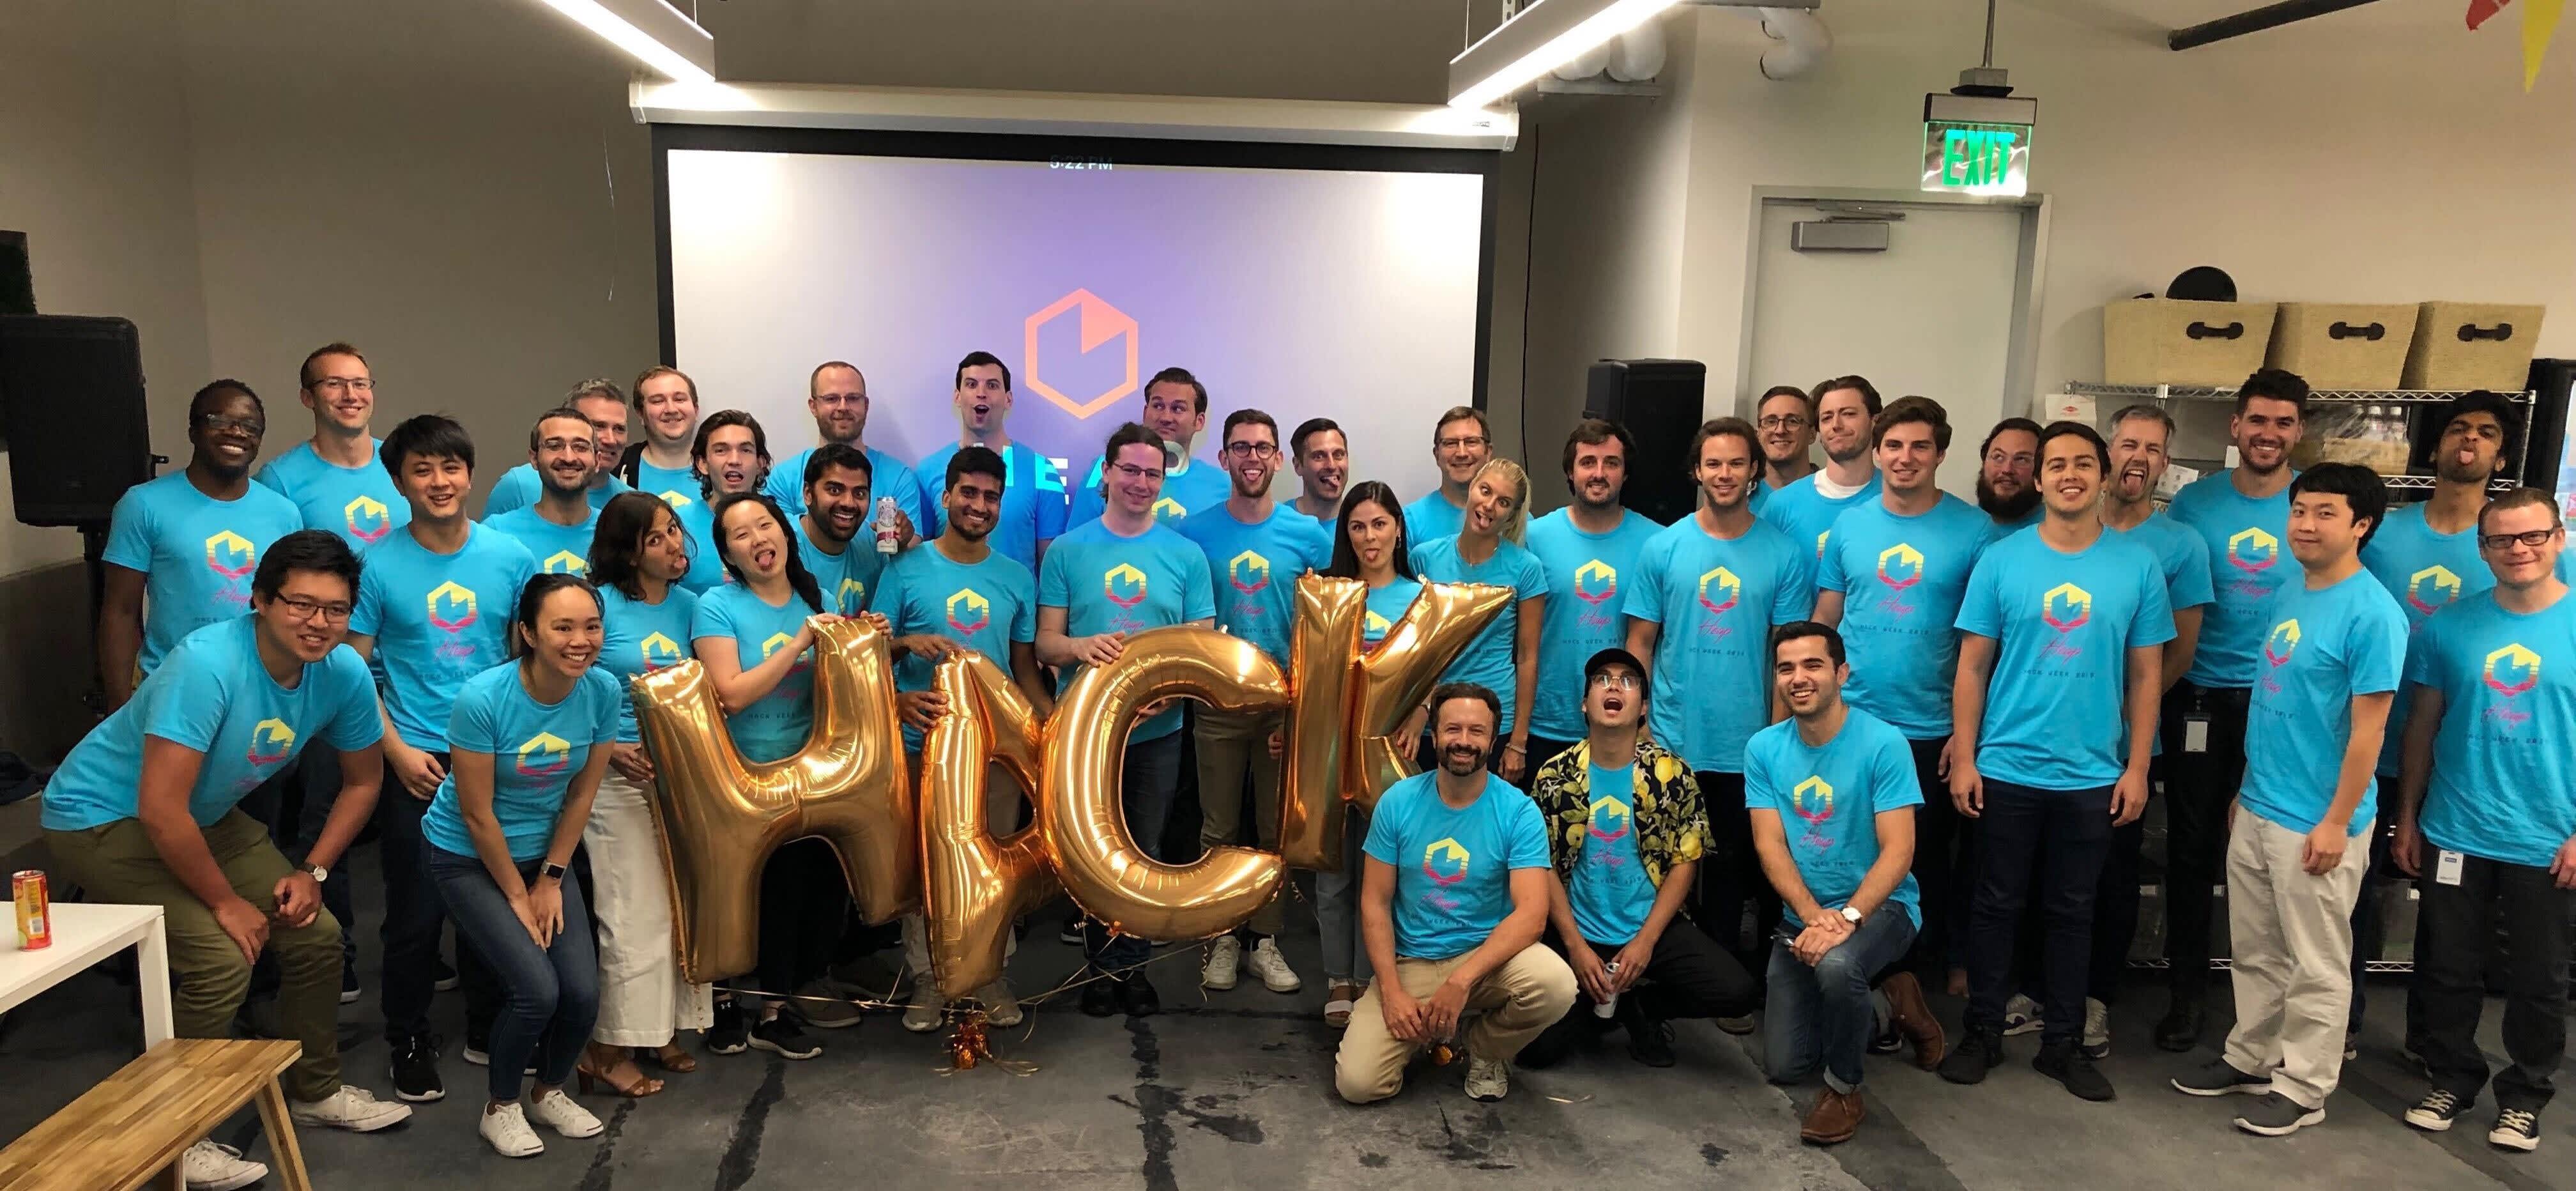 Photo of the Heap Engineering Team holding balloons that spell out "Hack"